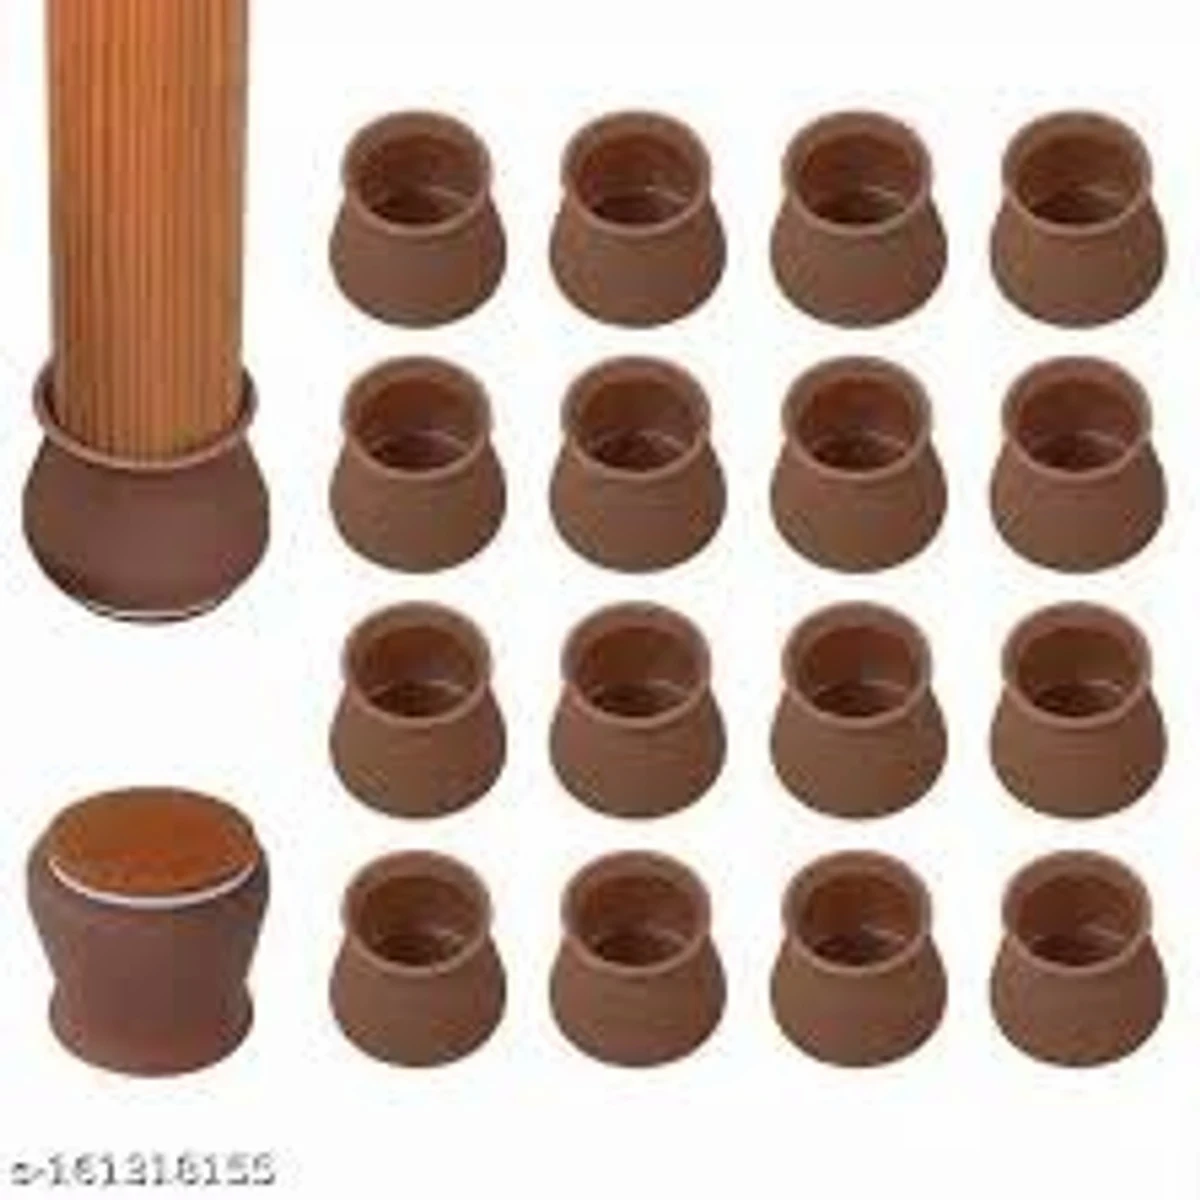 24 pcs Chair Leg Floor Protectors Felt Bottom Furniture Silicone Leg Caps, Chair Leg Covers to Reduce Noise, Easily Moving for Furniture Chair Feet,(coffee colour) 30% Off SKU: BM00215